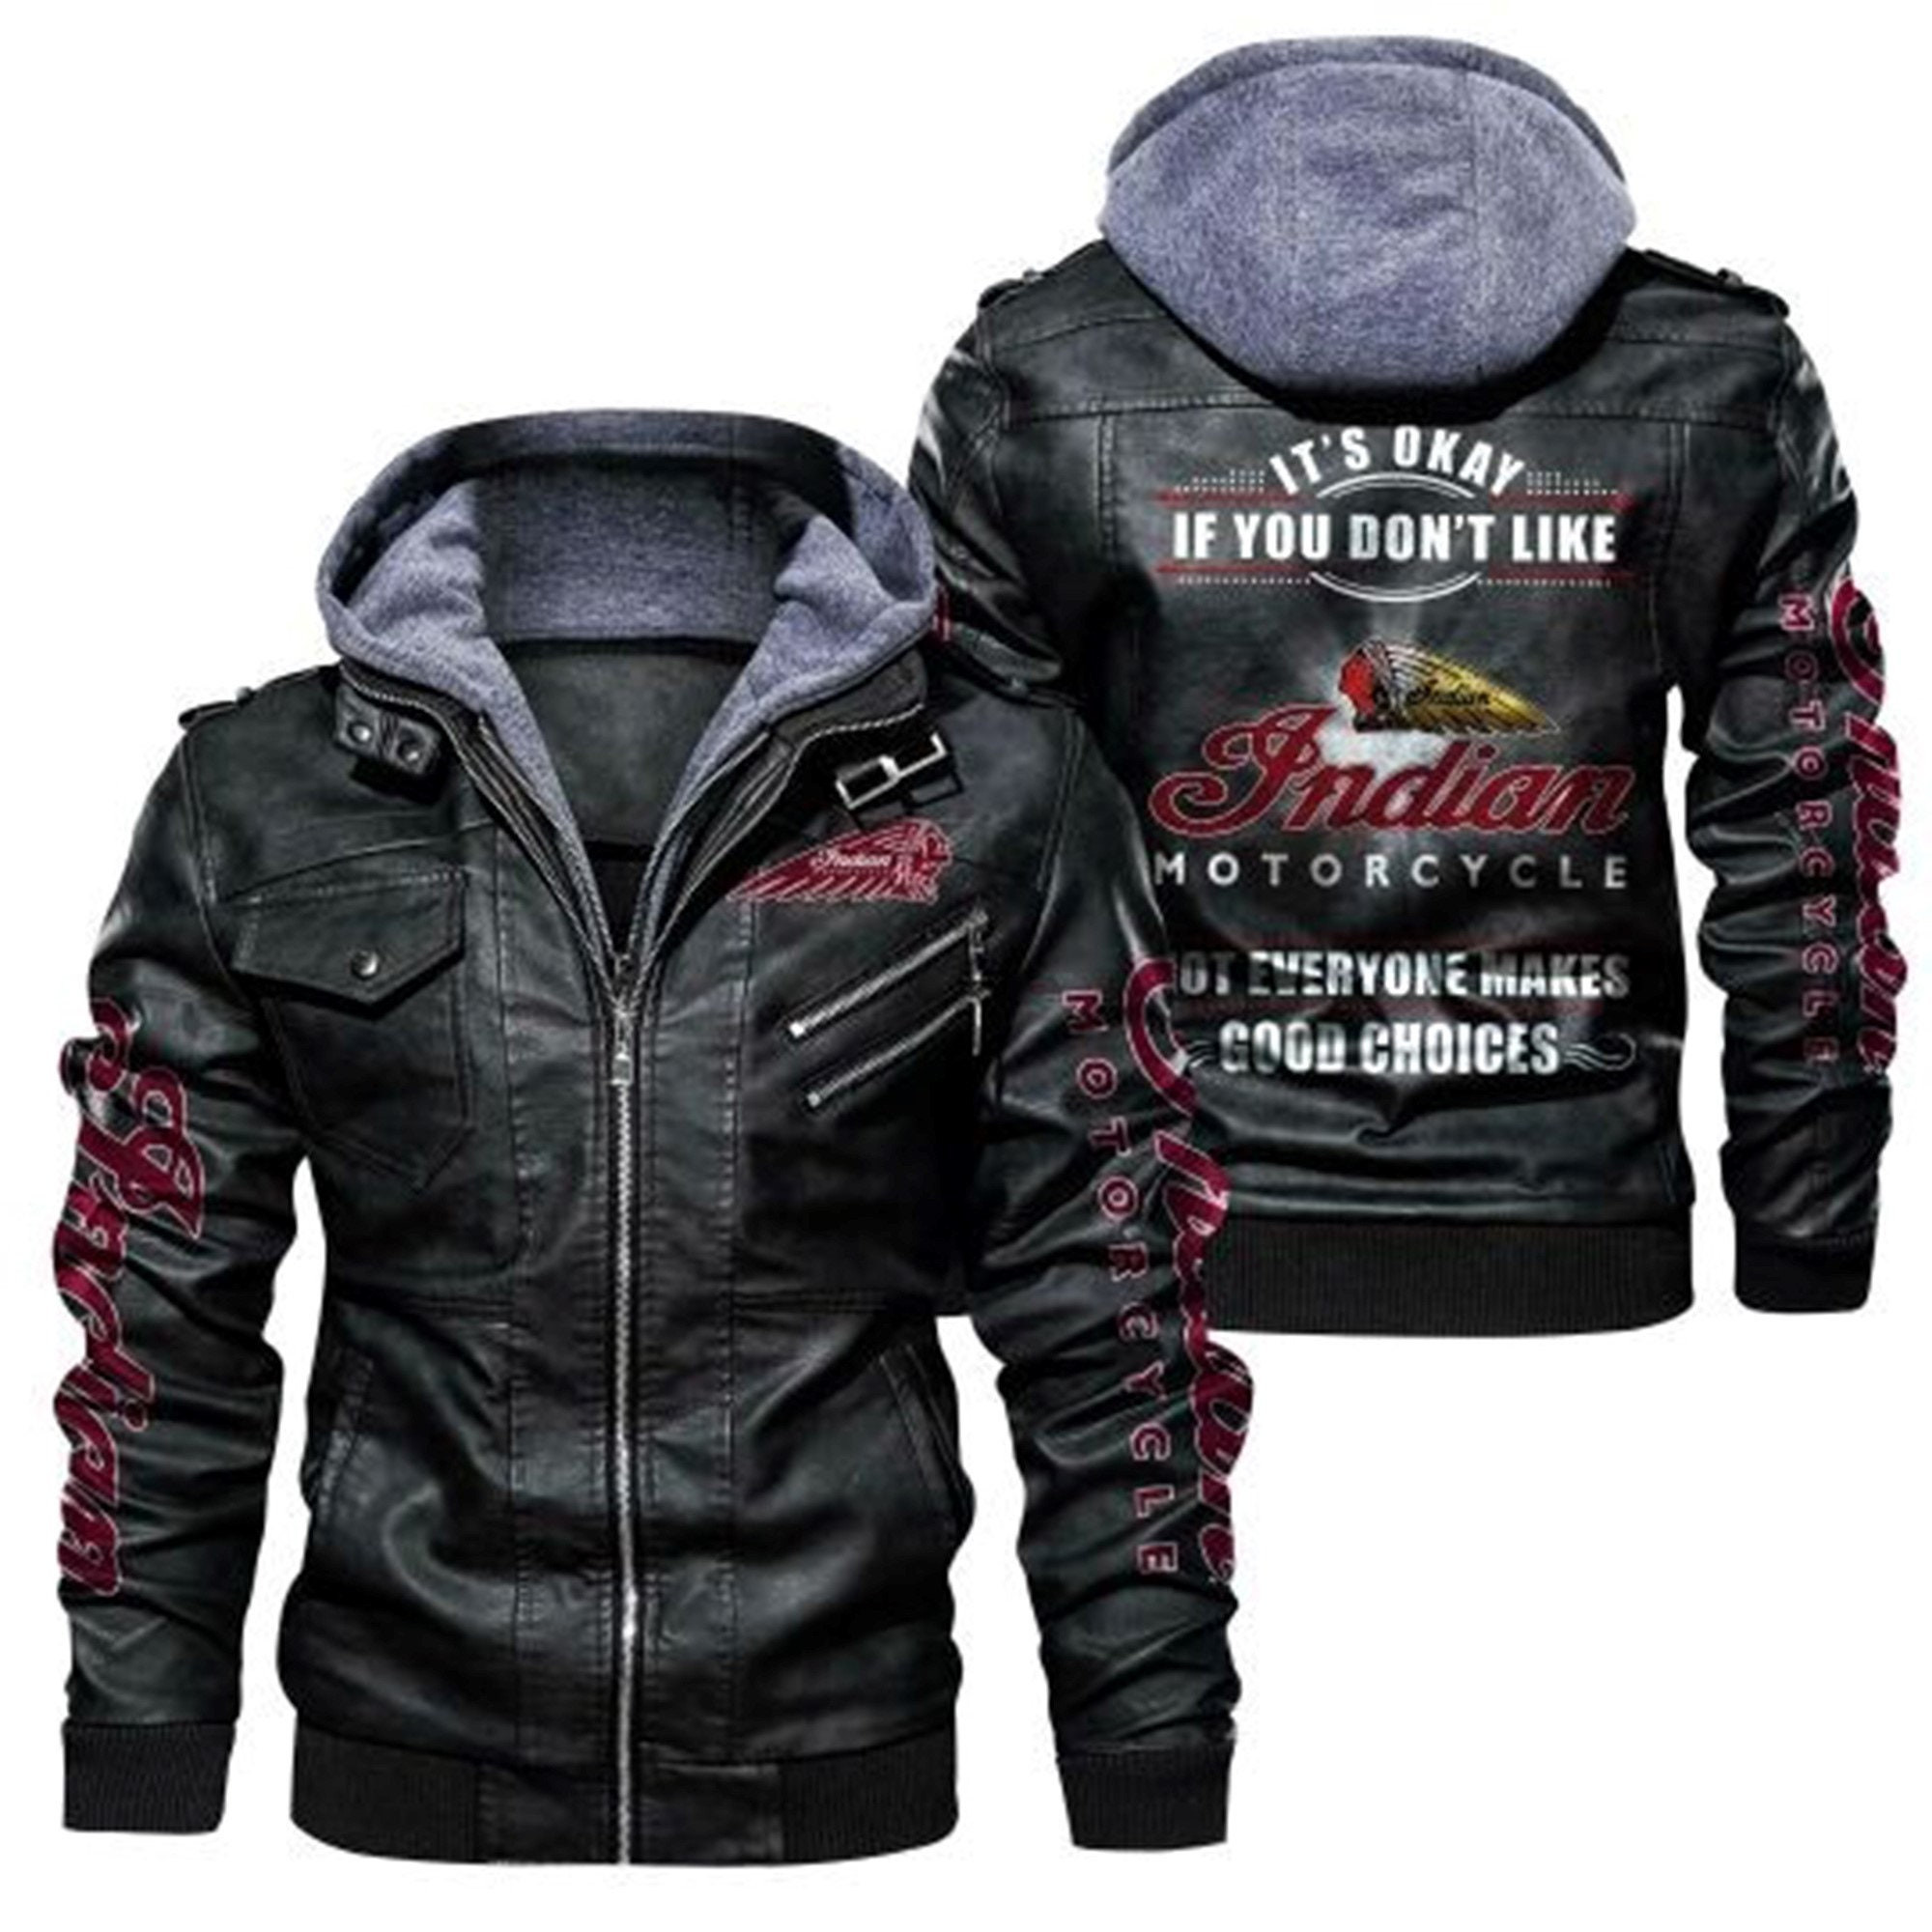 These Amazing Leather Jacket will add to the appeal of your outfit 439